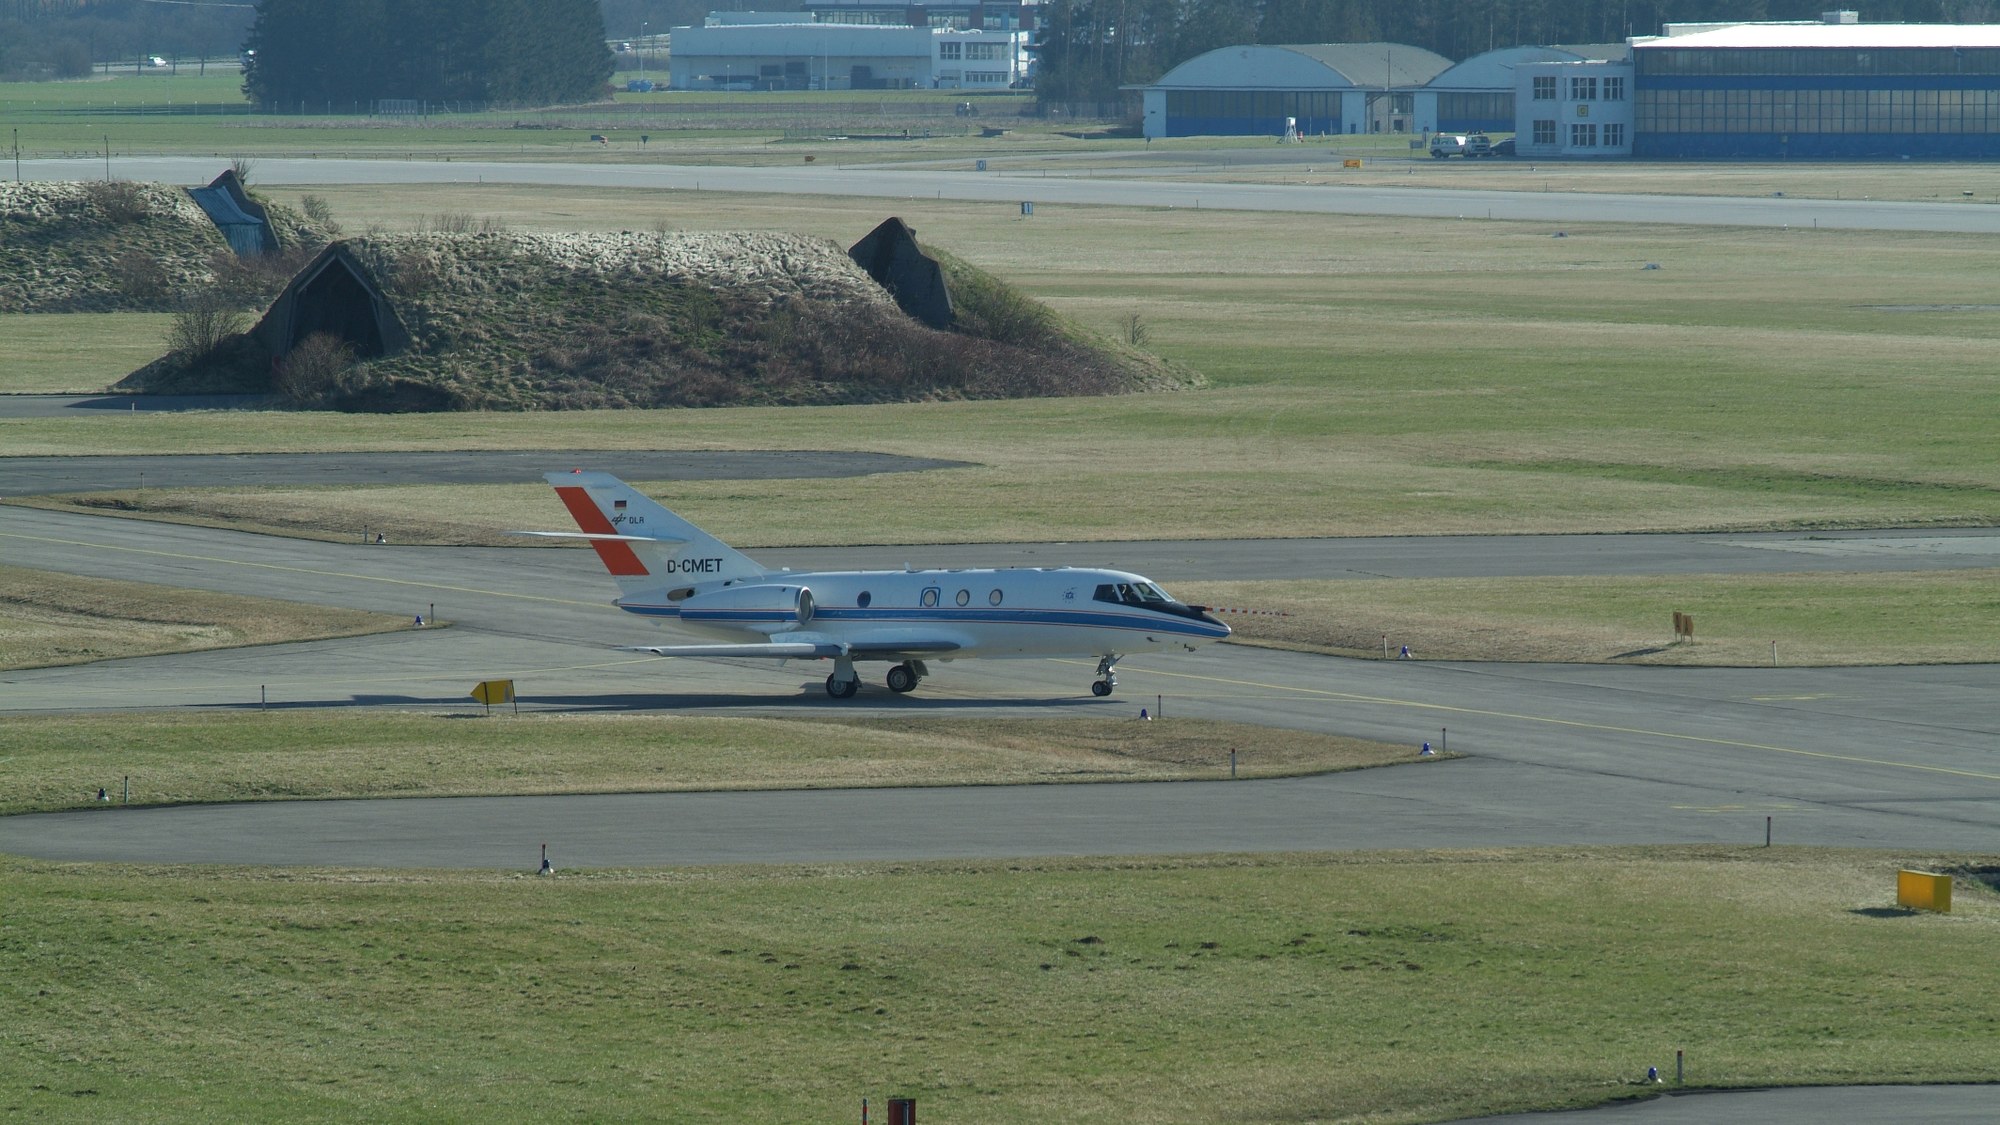 The Falcon 20E makes its way to the runway